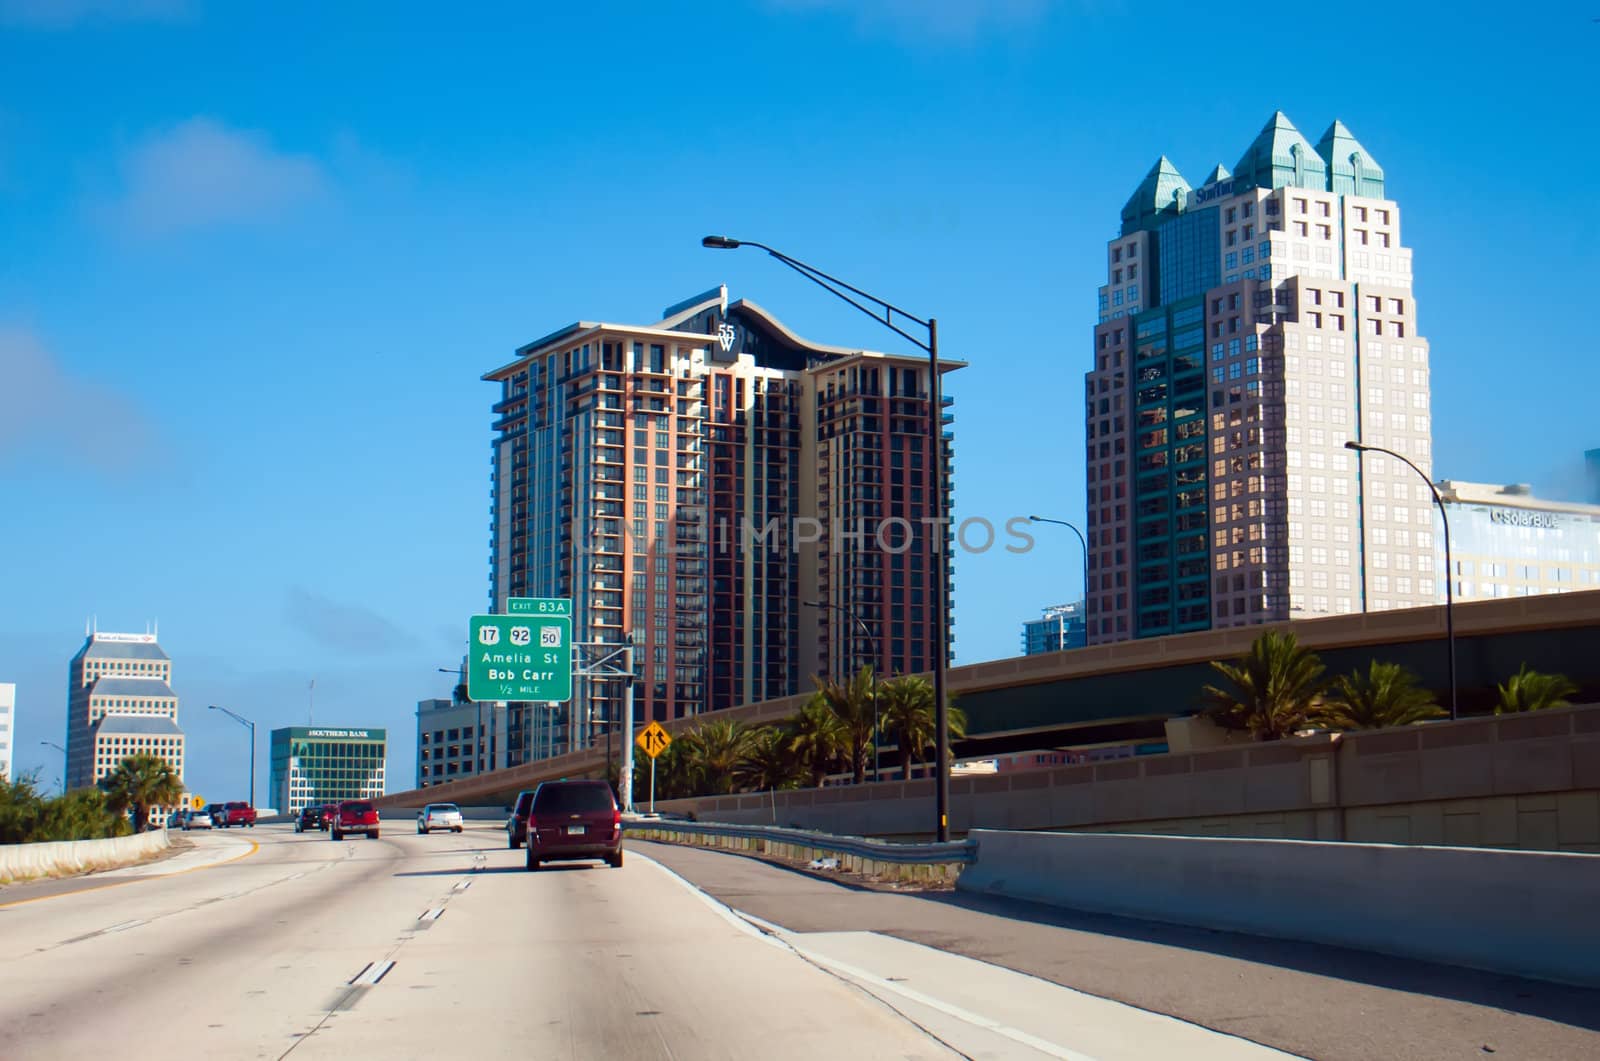 City of Orlando, Florida, view from highway